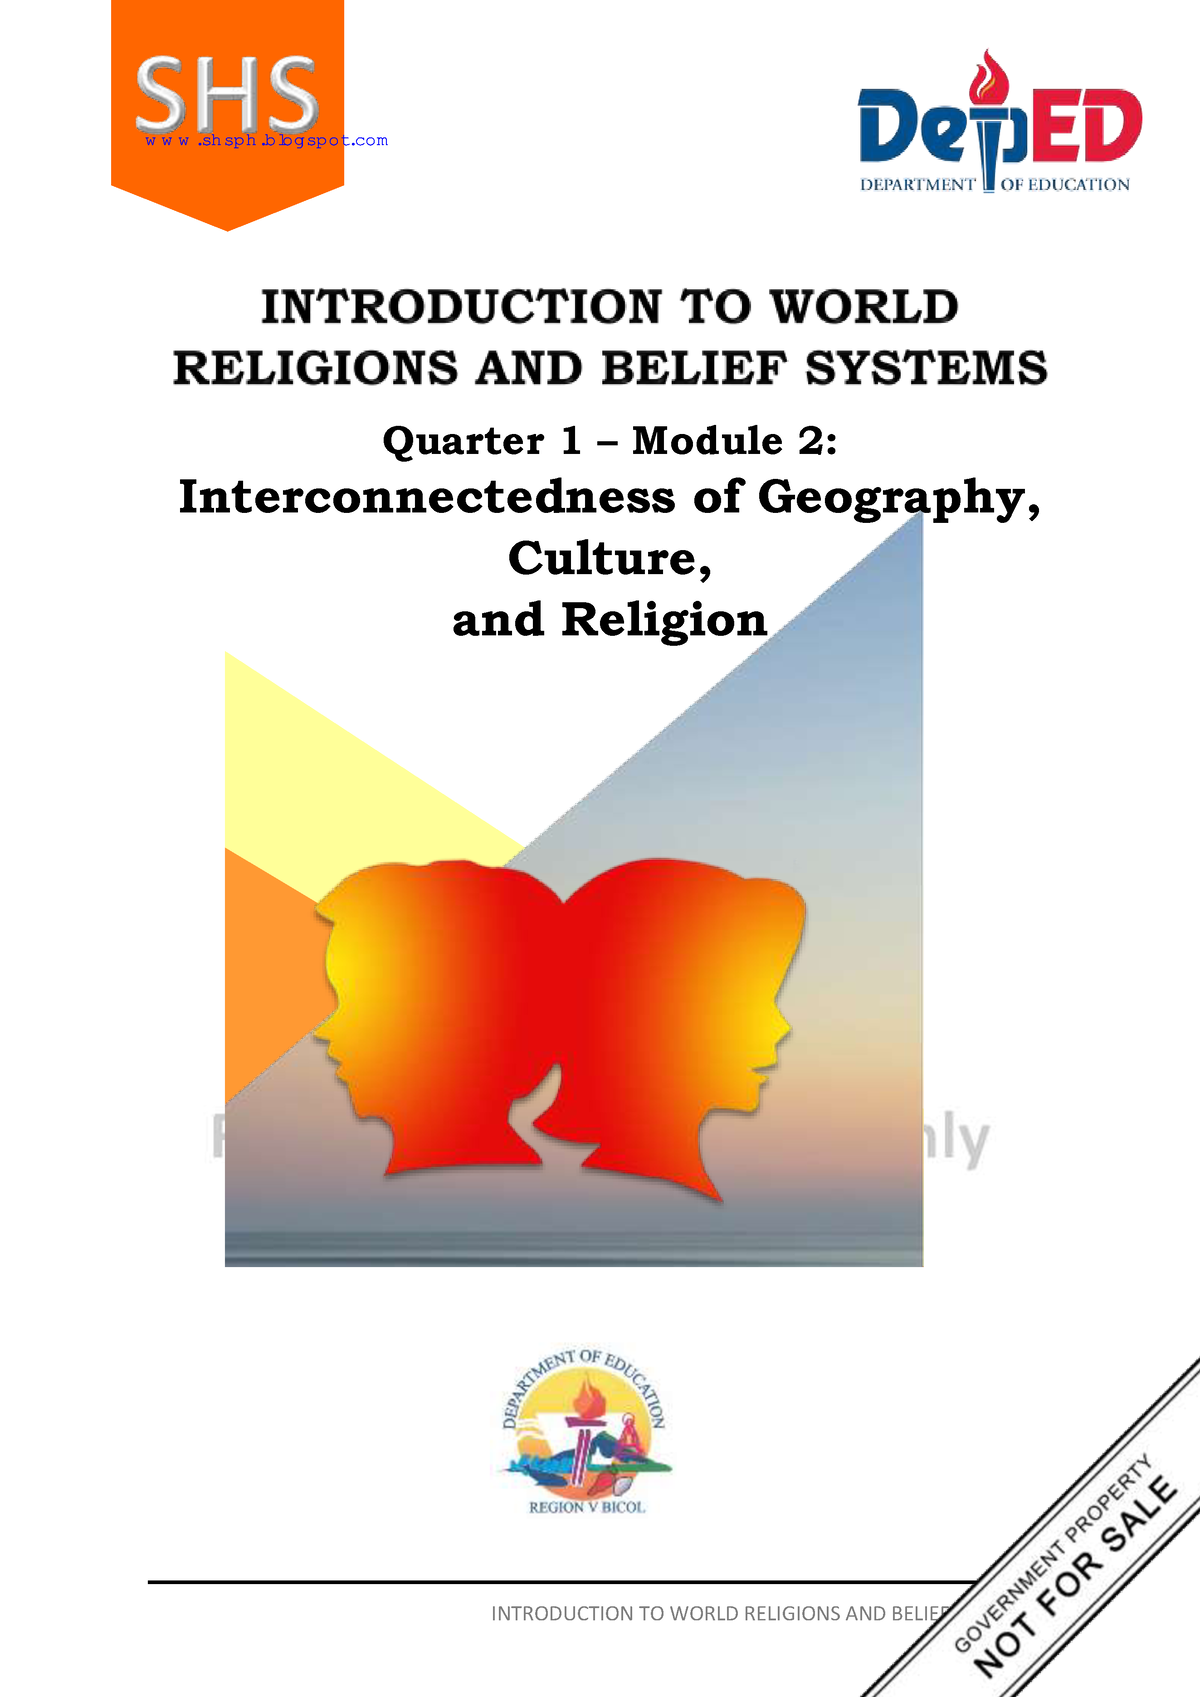 essay about interconnectedness of religion culture and geography brainly